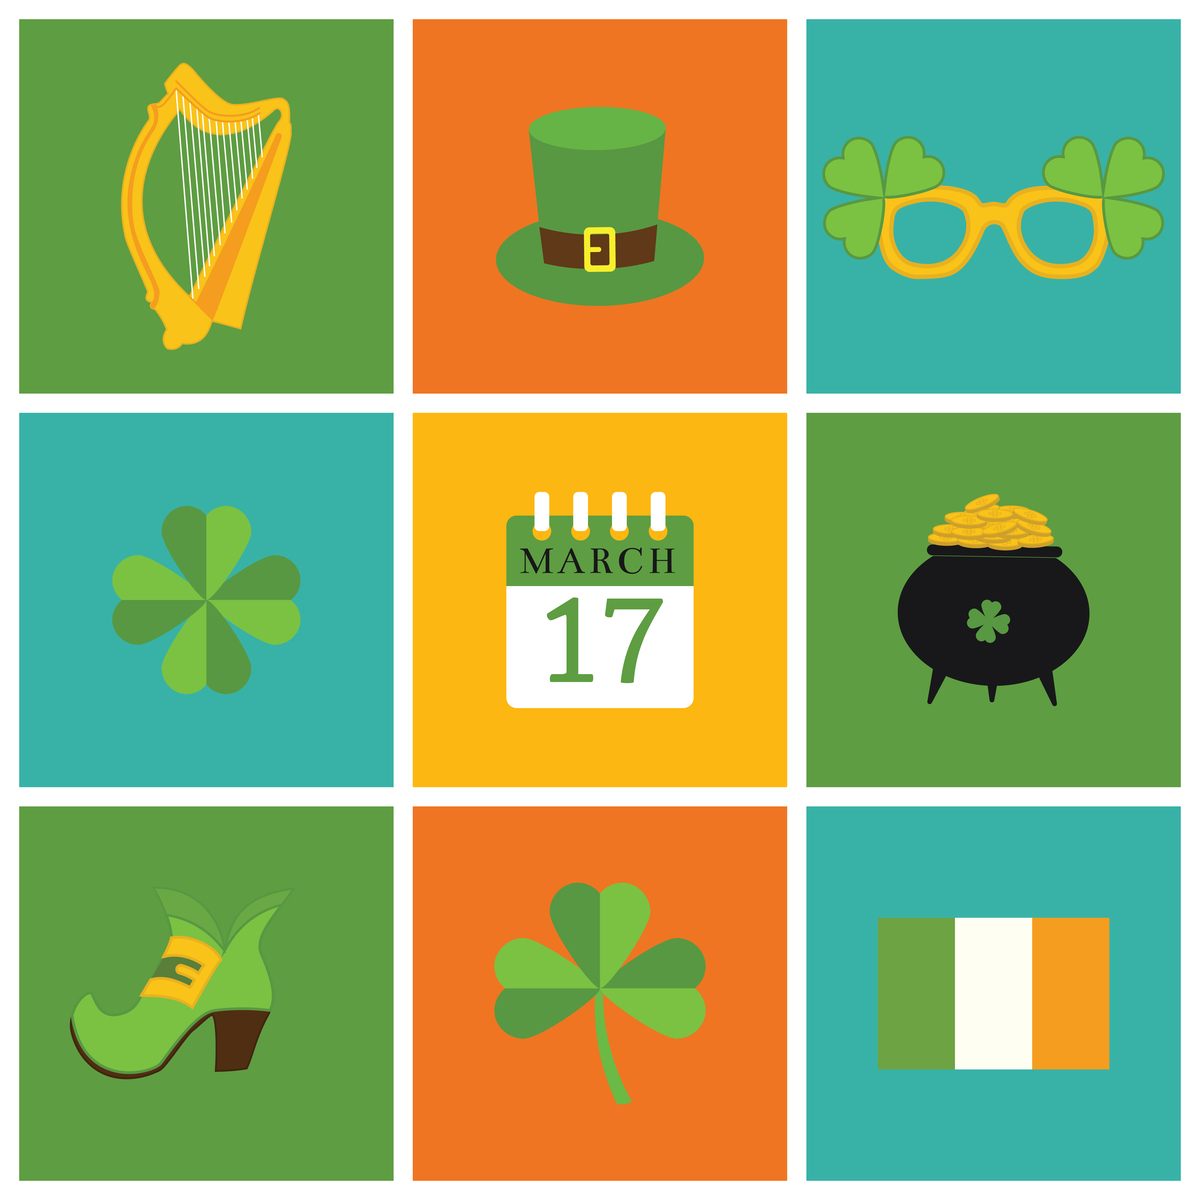 A grid of nine squares each with a different symbol of St. Patrick's Day, including a harp, a leprechaun hat, shamrock glasses, a four leaf clover, a calendar flipped to March 17, a pot of gold, a leprechaun shoe, a shamrock and the flag of Ireland.